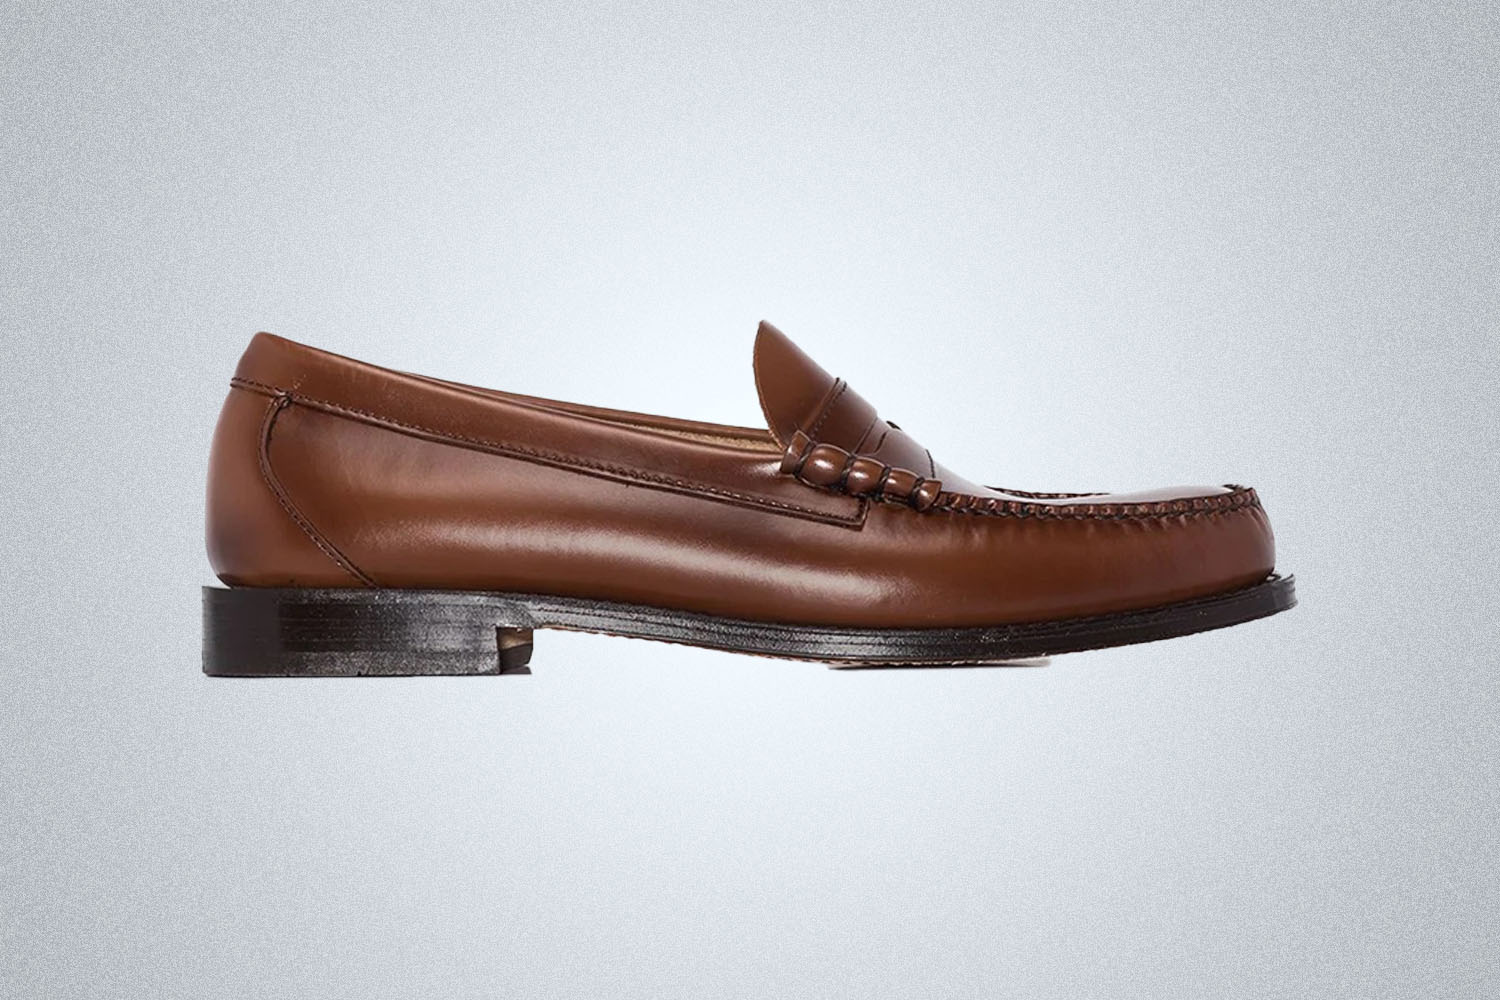 A pair of brown loafers from G.H. Bass on a grey background